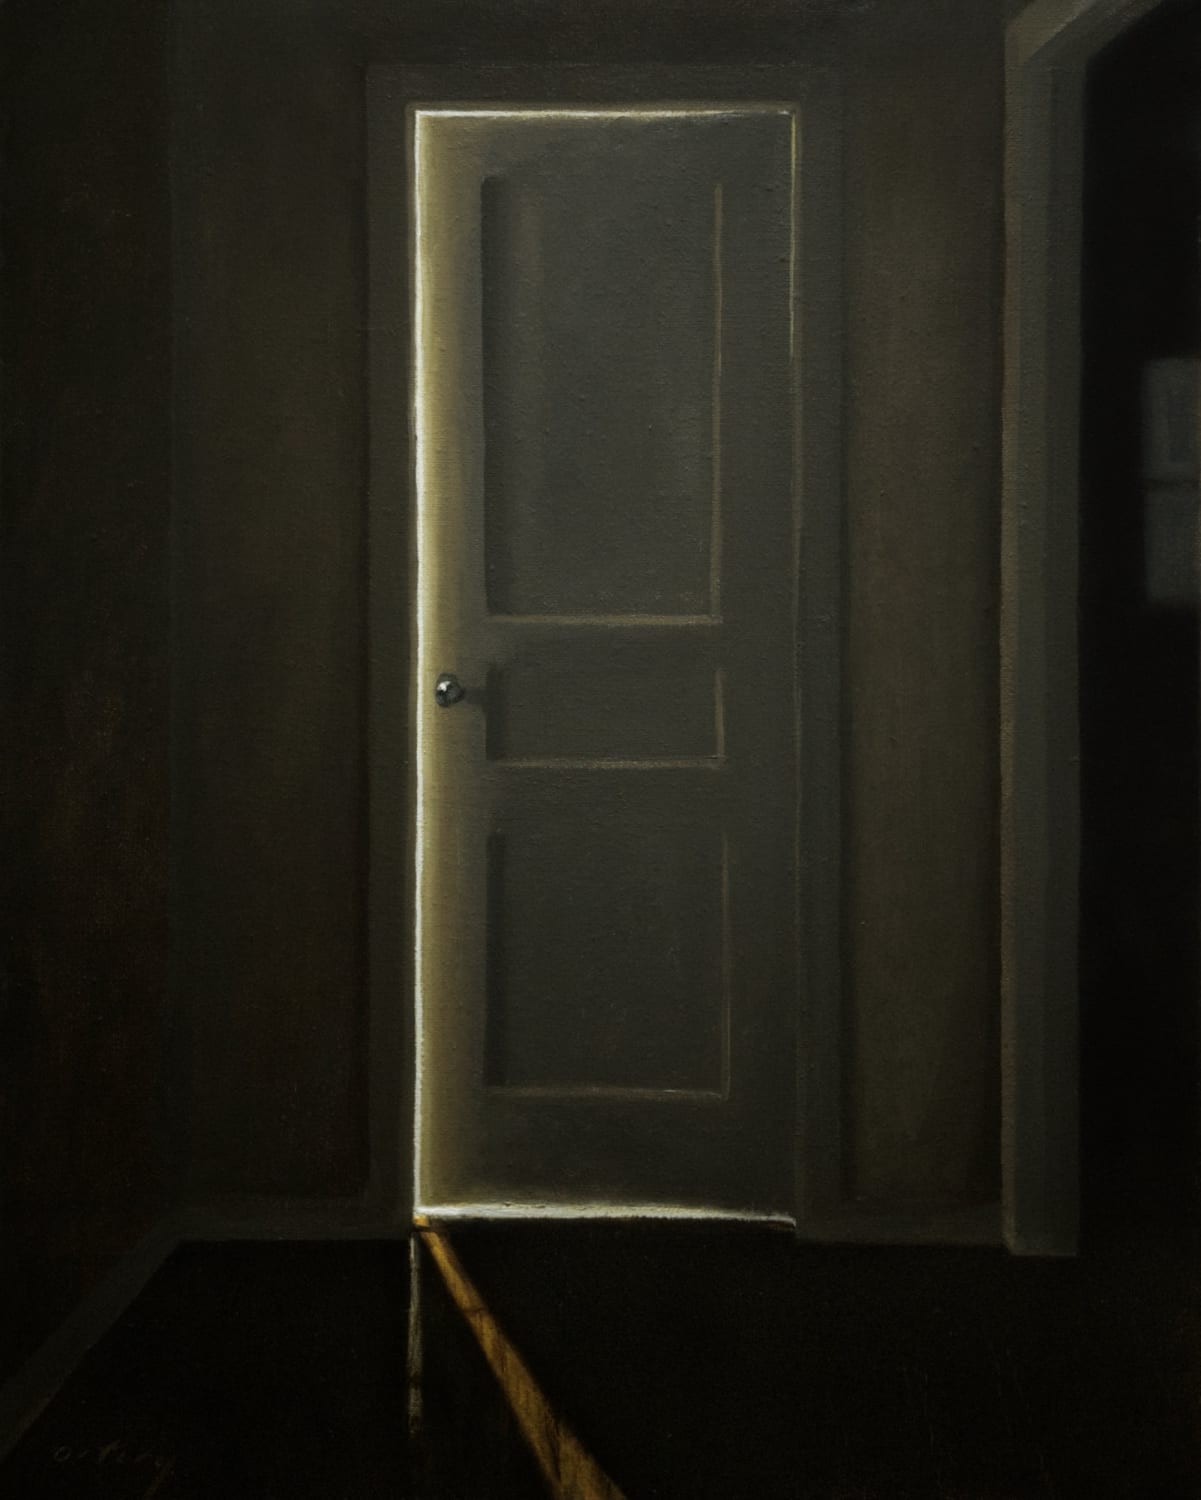 Finished painting from my other post here. Sliver, oil on linen